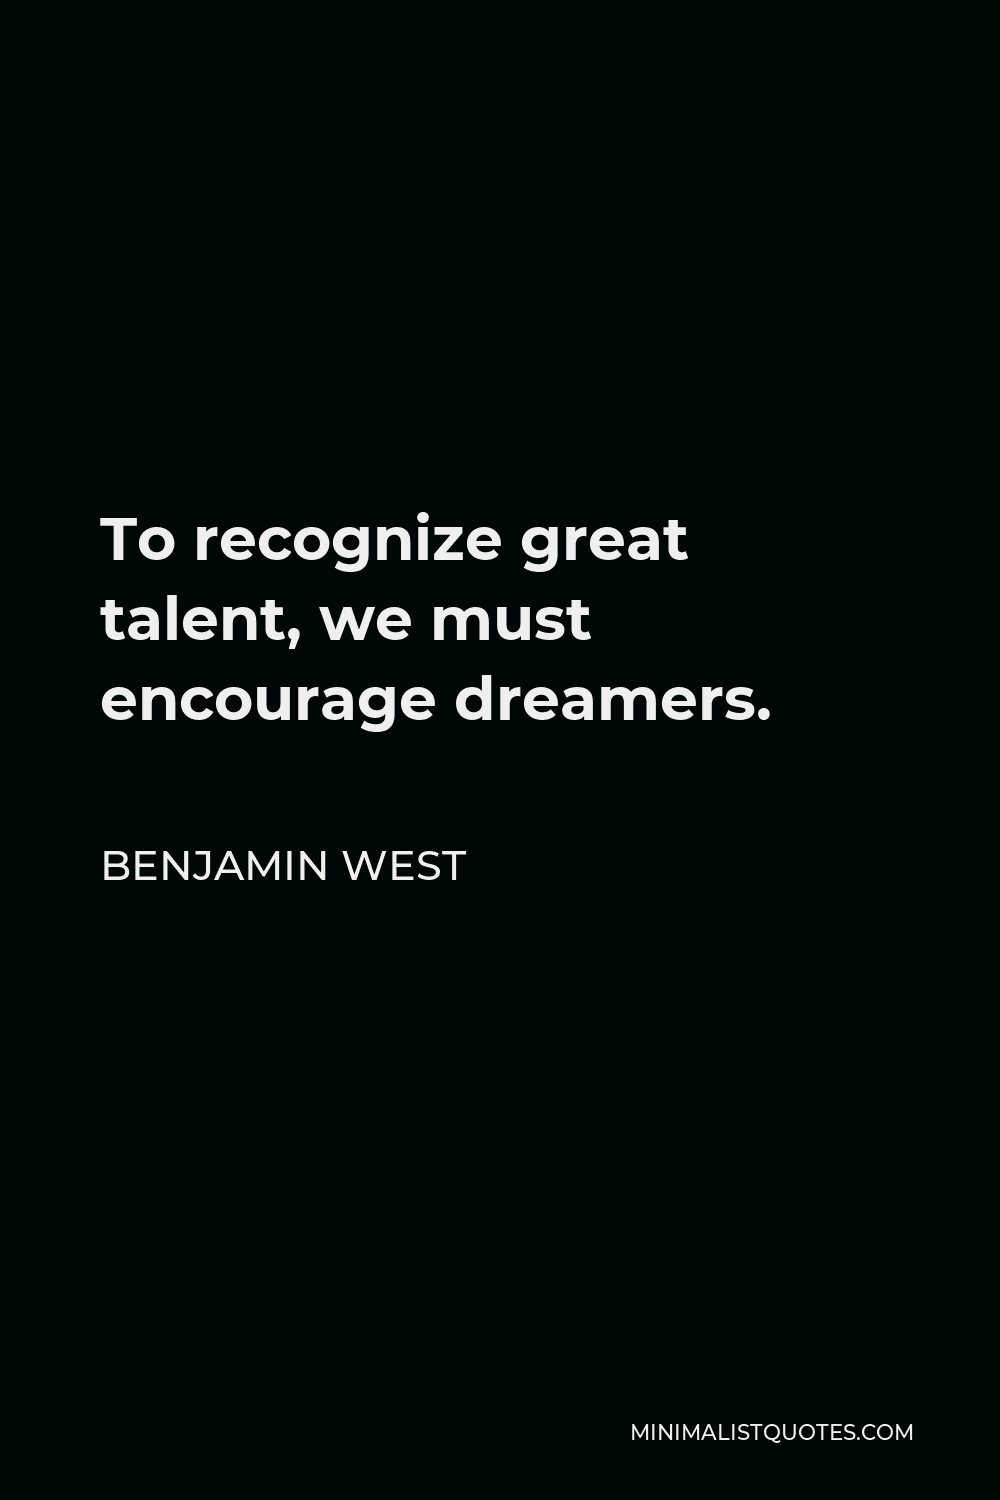 Benjamin West Quote - To recognize great talent, we must encourage dreamers.